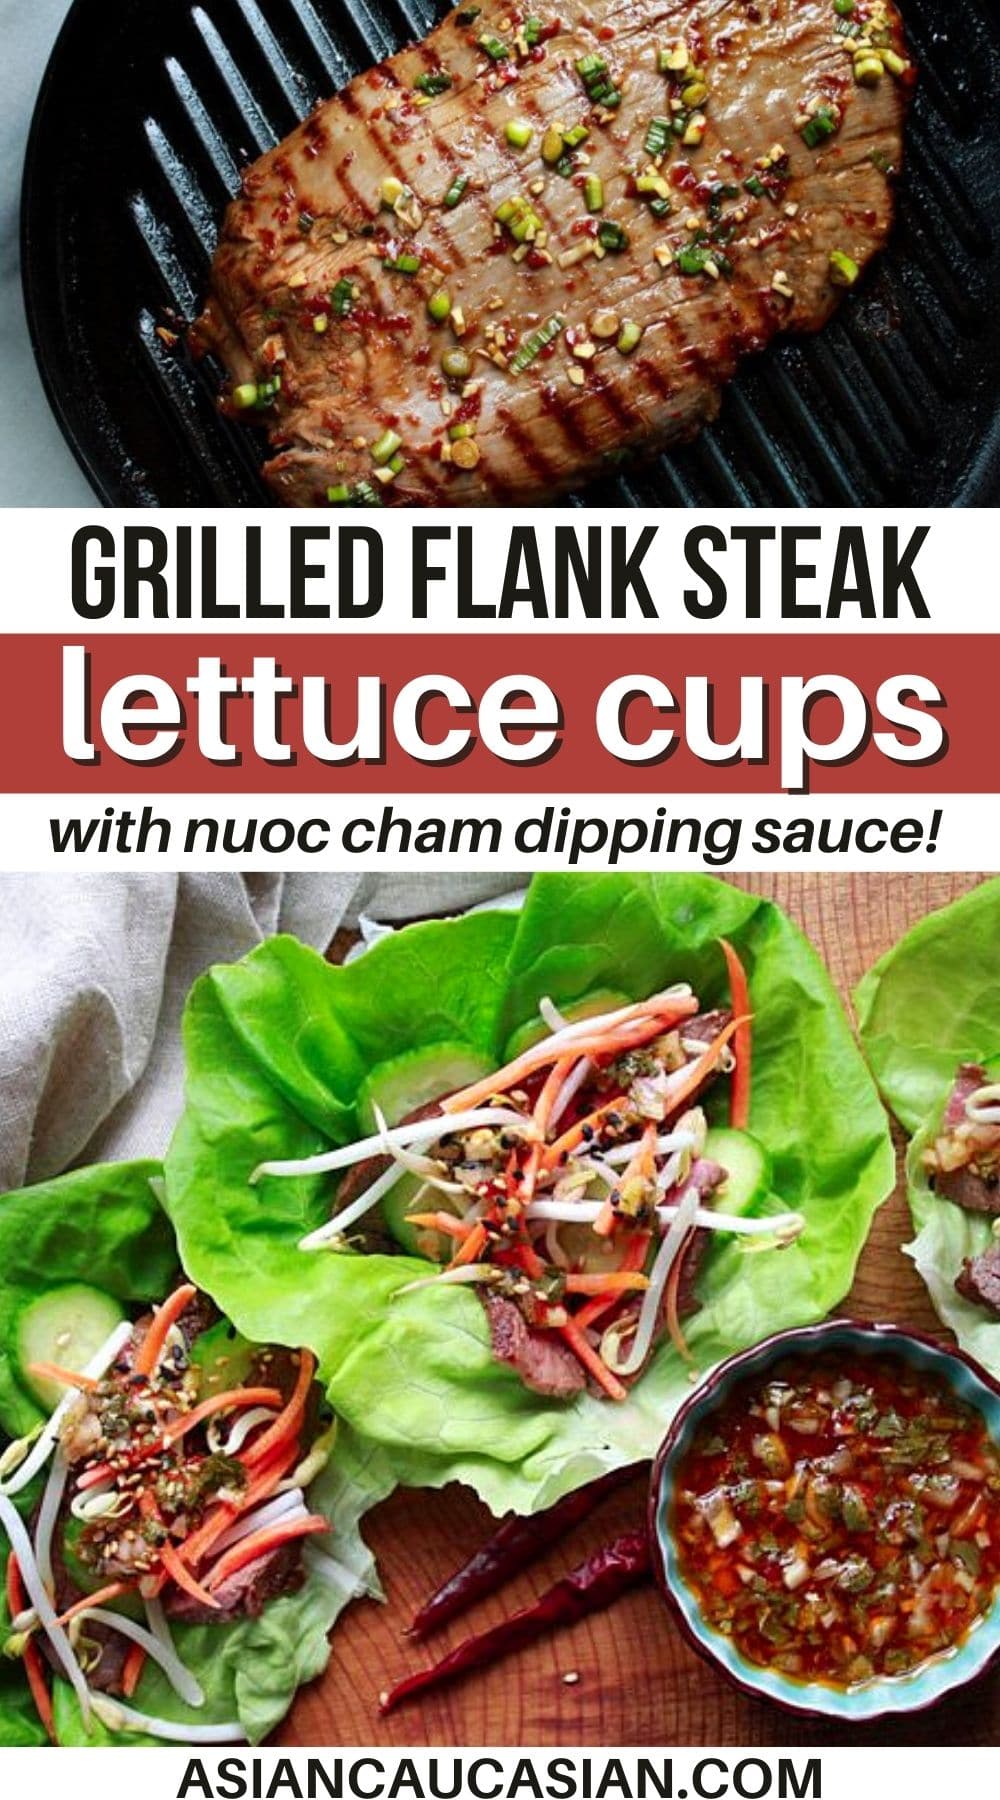 Overhead view of grilled flank steak lettuce cups on a wooden board with a side of nuoc cham sauce in a blue bowl with hot peppers. And a flank steak being grilled on a stove-top grill pan.